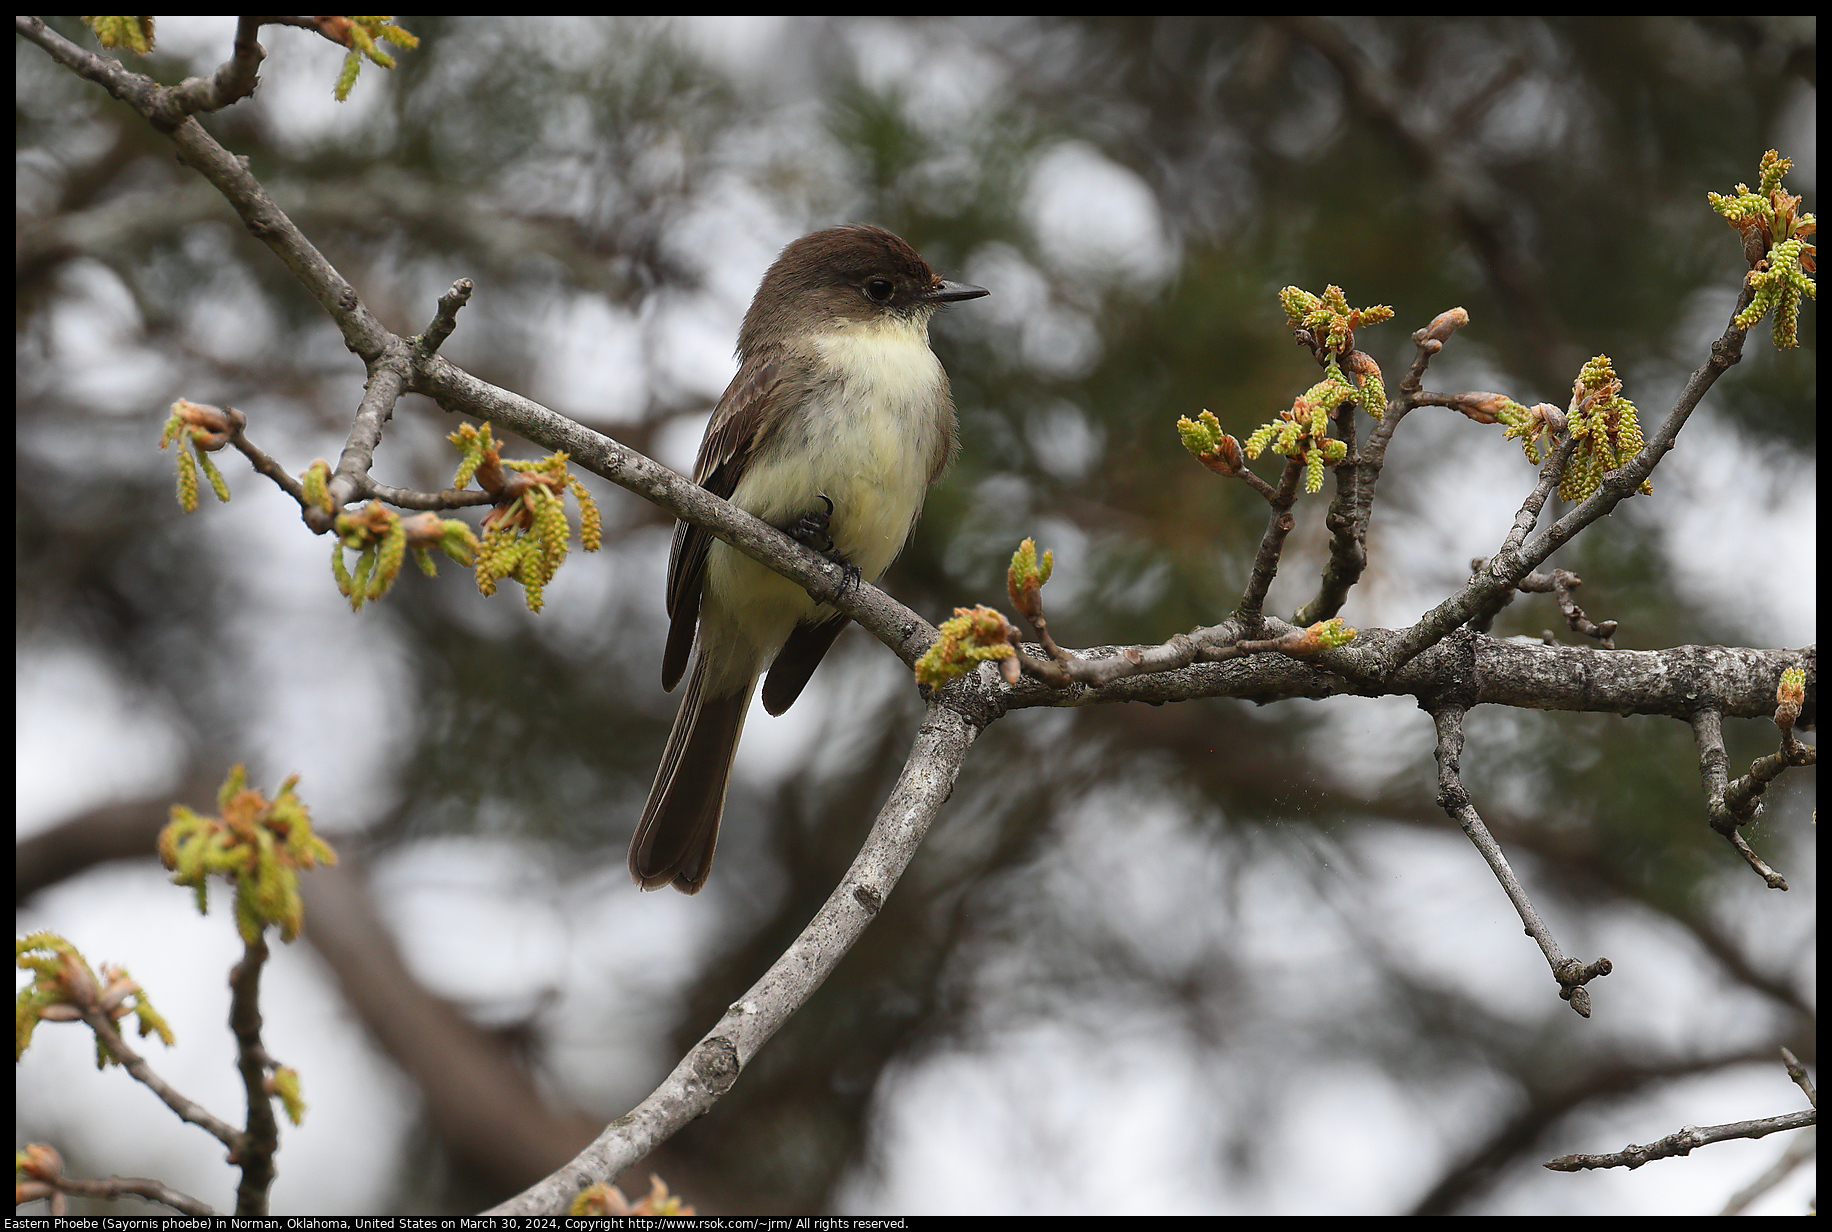 Eastern Phoebe (Sayornis phoebe) in Norman, Oklahoma, United States on March 30, 2024